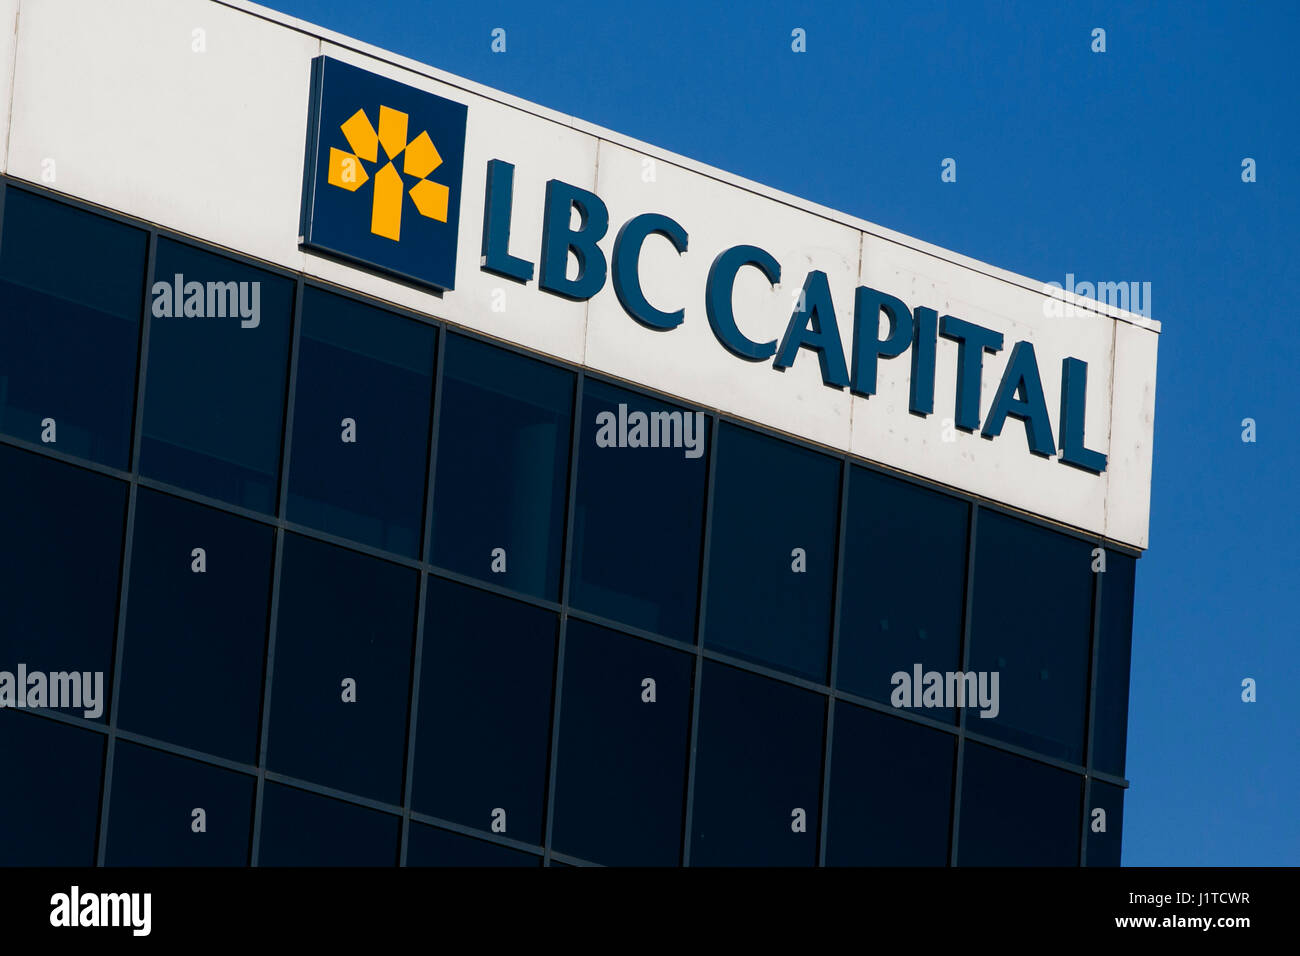 A logo sign outside of the headquarters of LBC Capital in Burlington, ON, Canada on April 14, 2017. Stock Photo